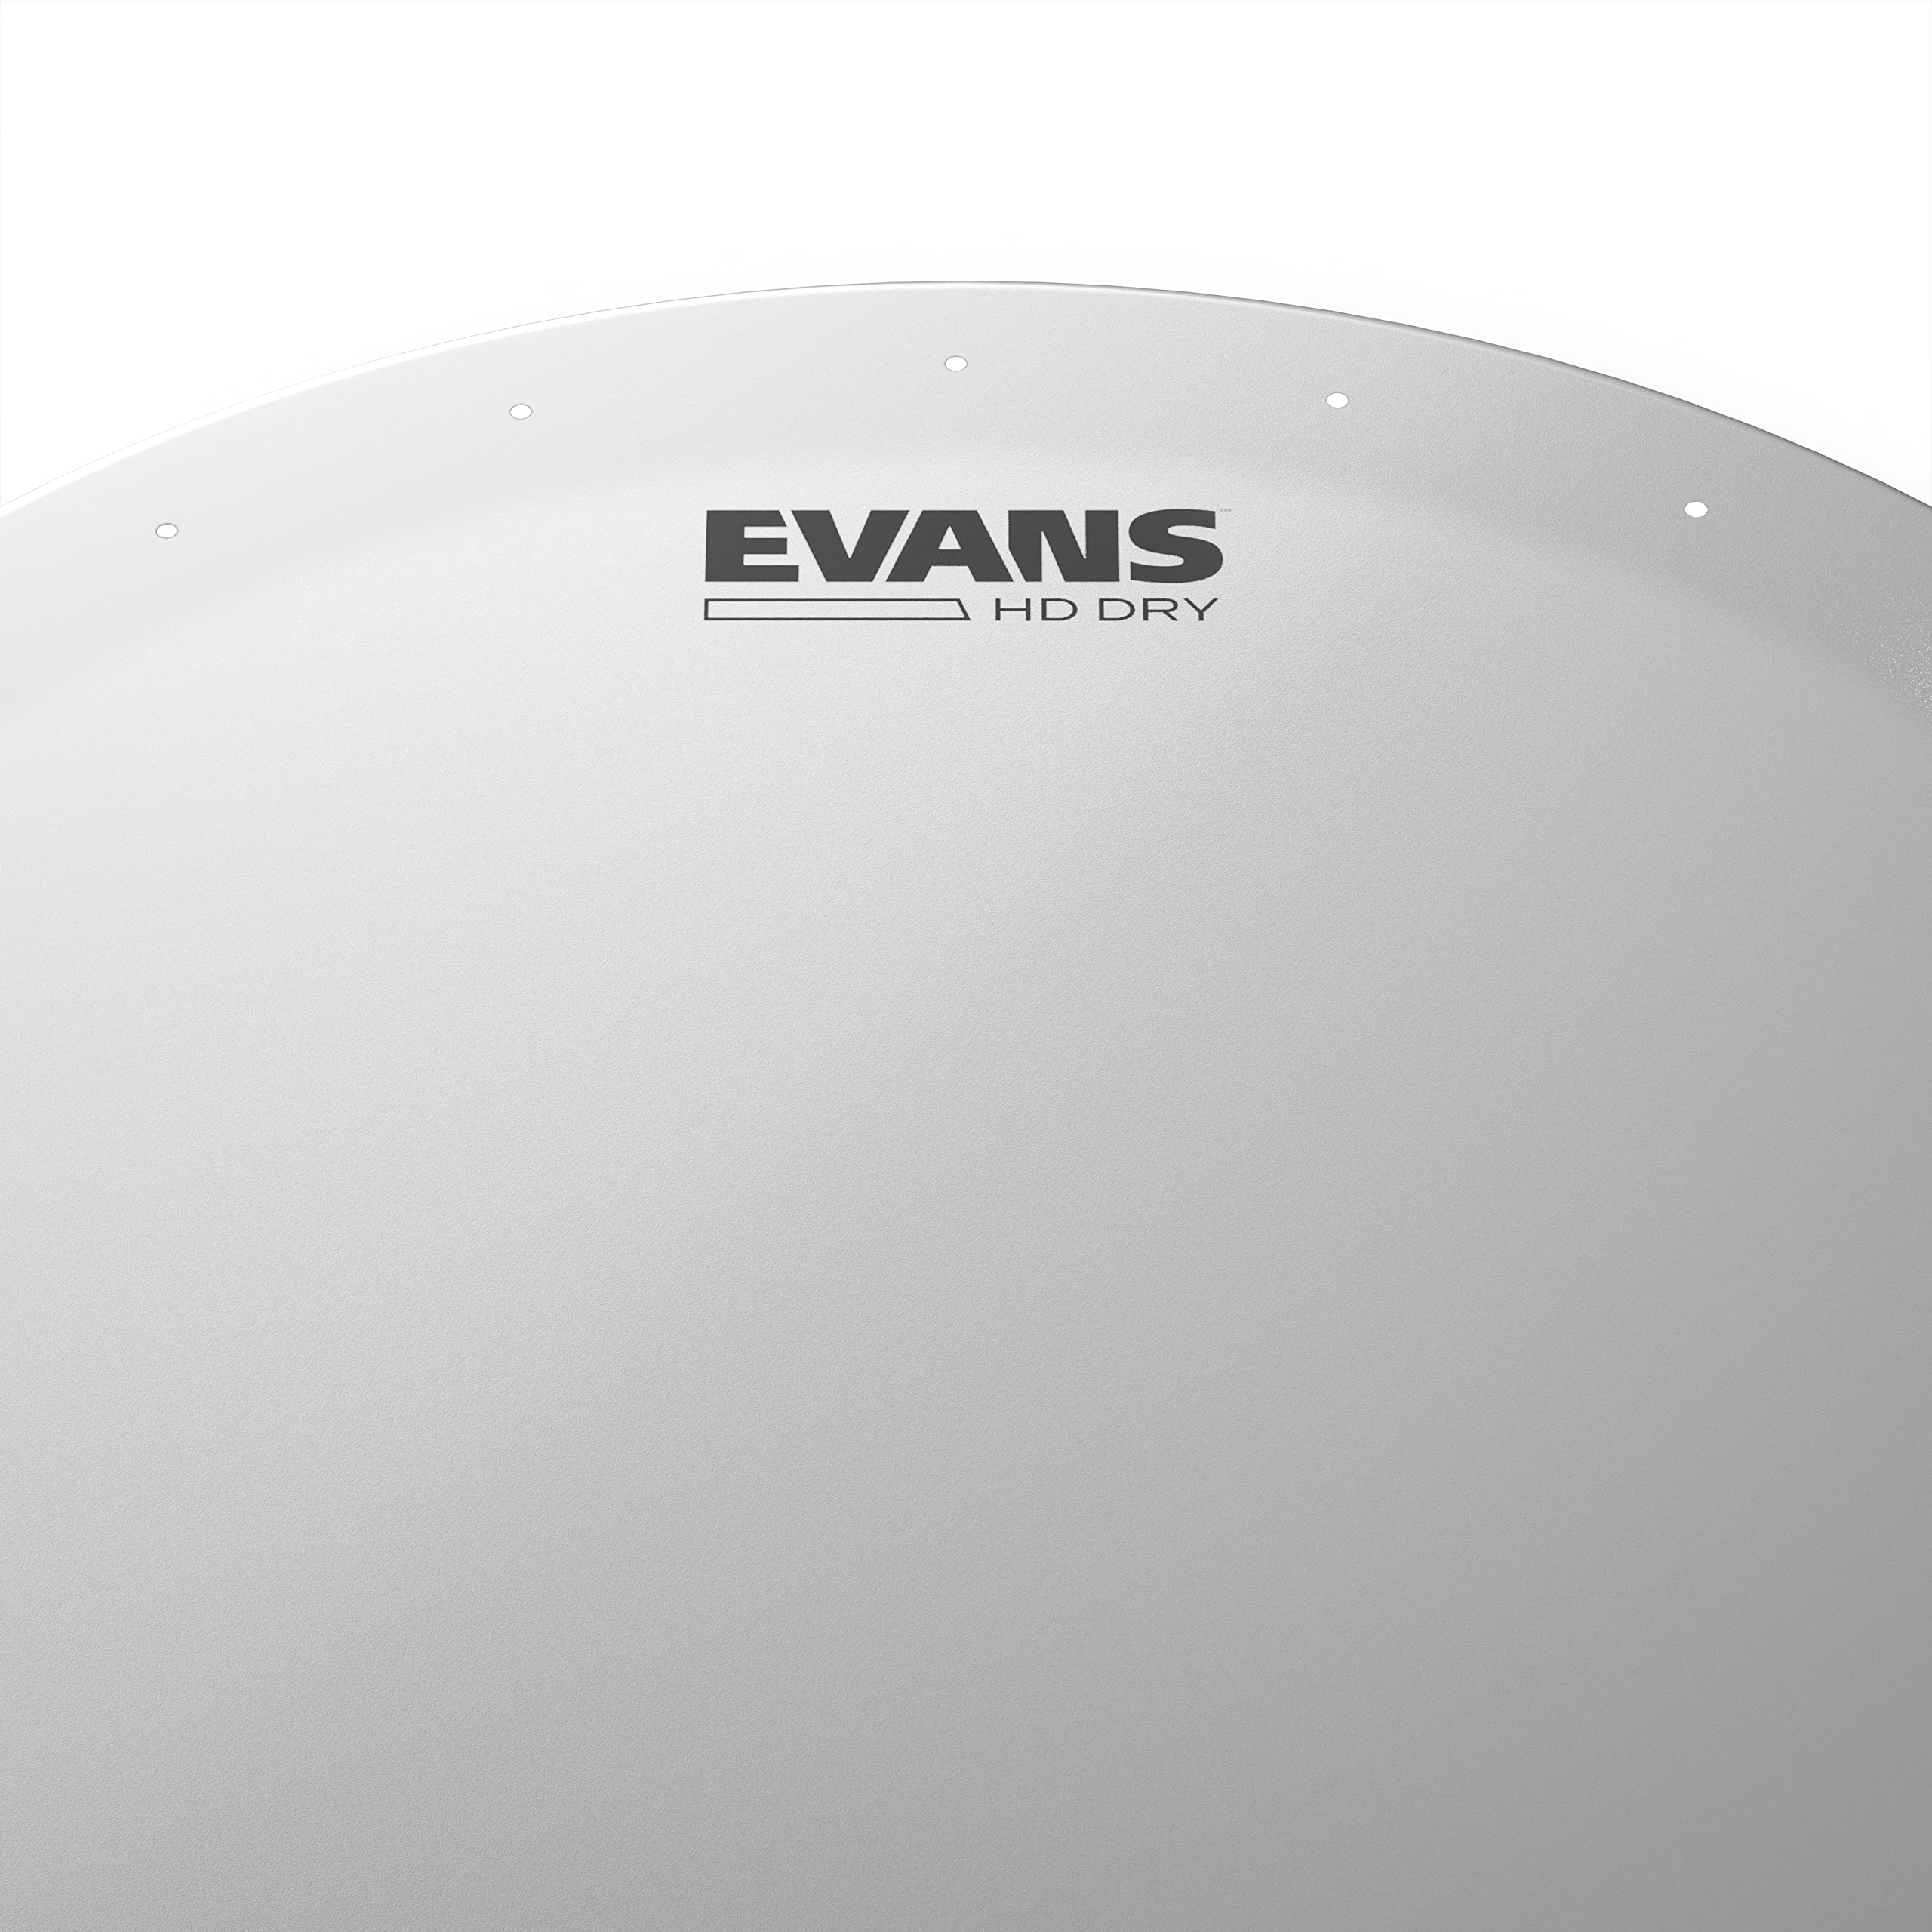 Evans Genera HD Dry Snare Drum Head - 14 Snare Drum Head - Featuring Vent Holes to Control Sustain & Tighten Sound - Overtone Control - Coated with 2 Plies - 14 Inch